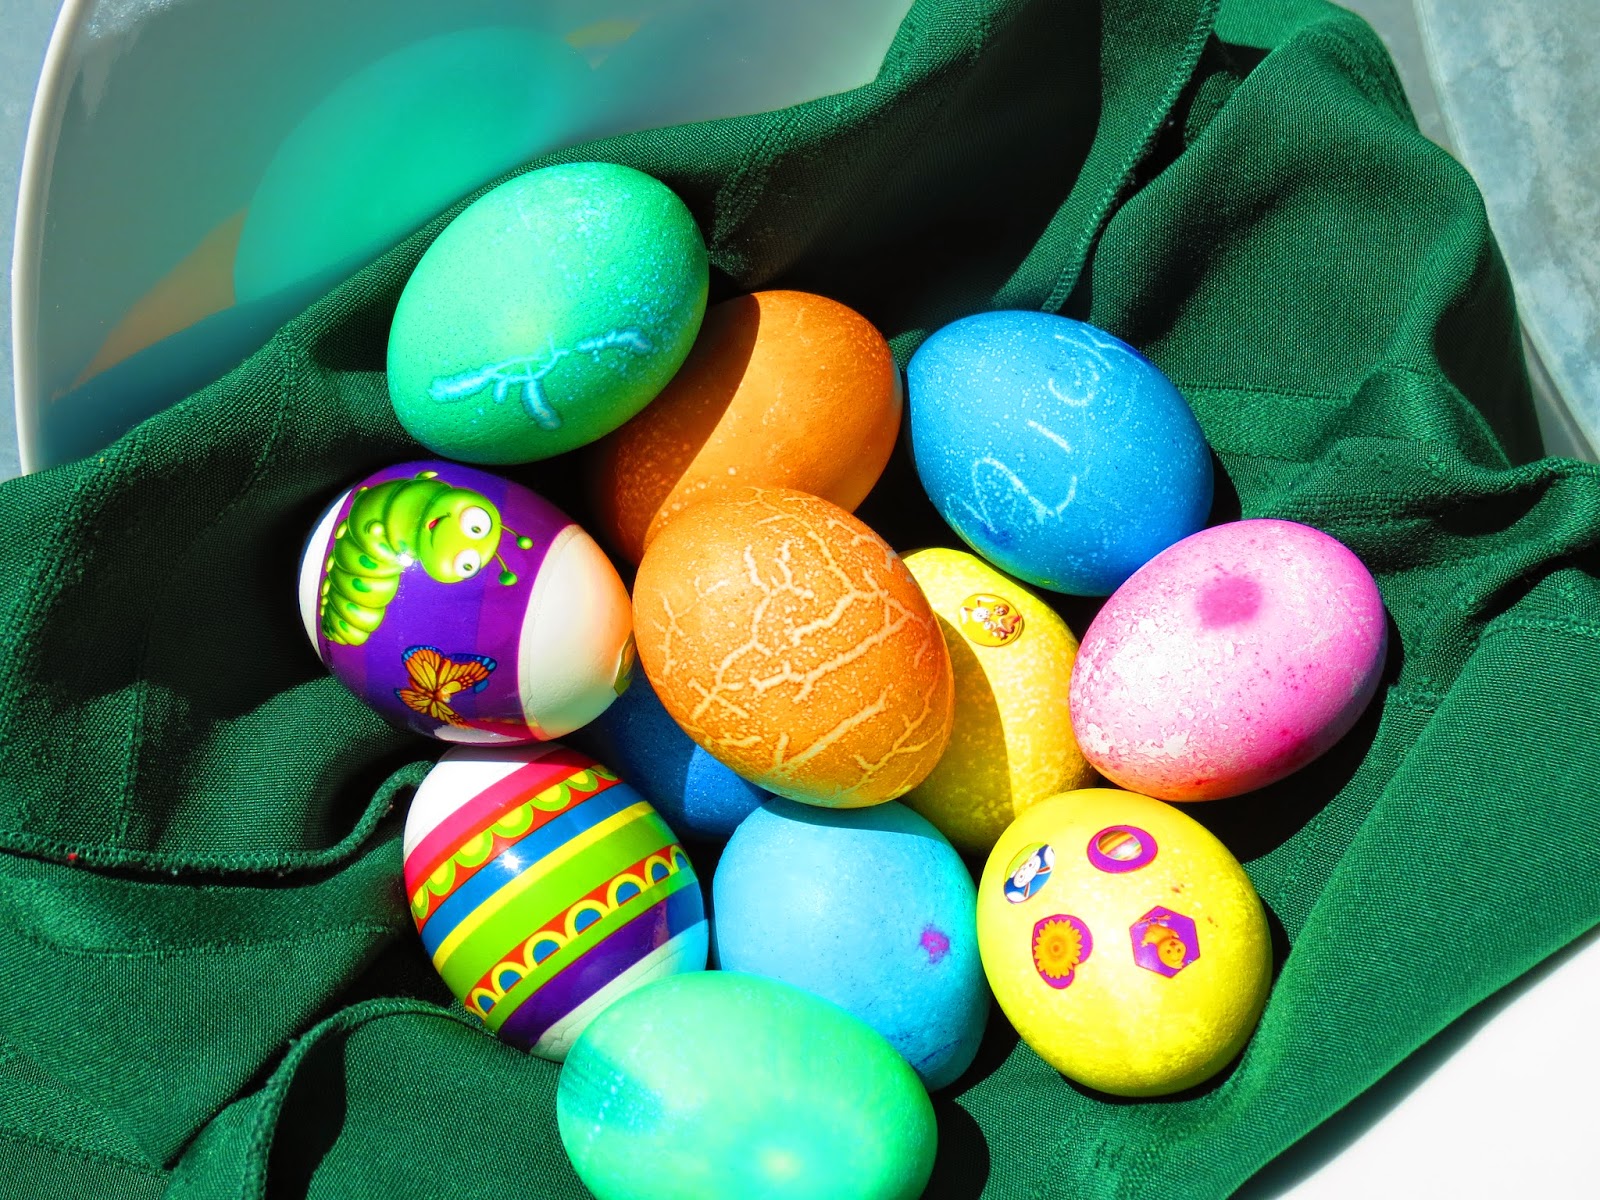 TIMLENNOX.COM: The 2014 Easter Egg Collection